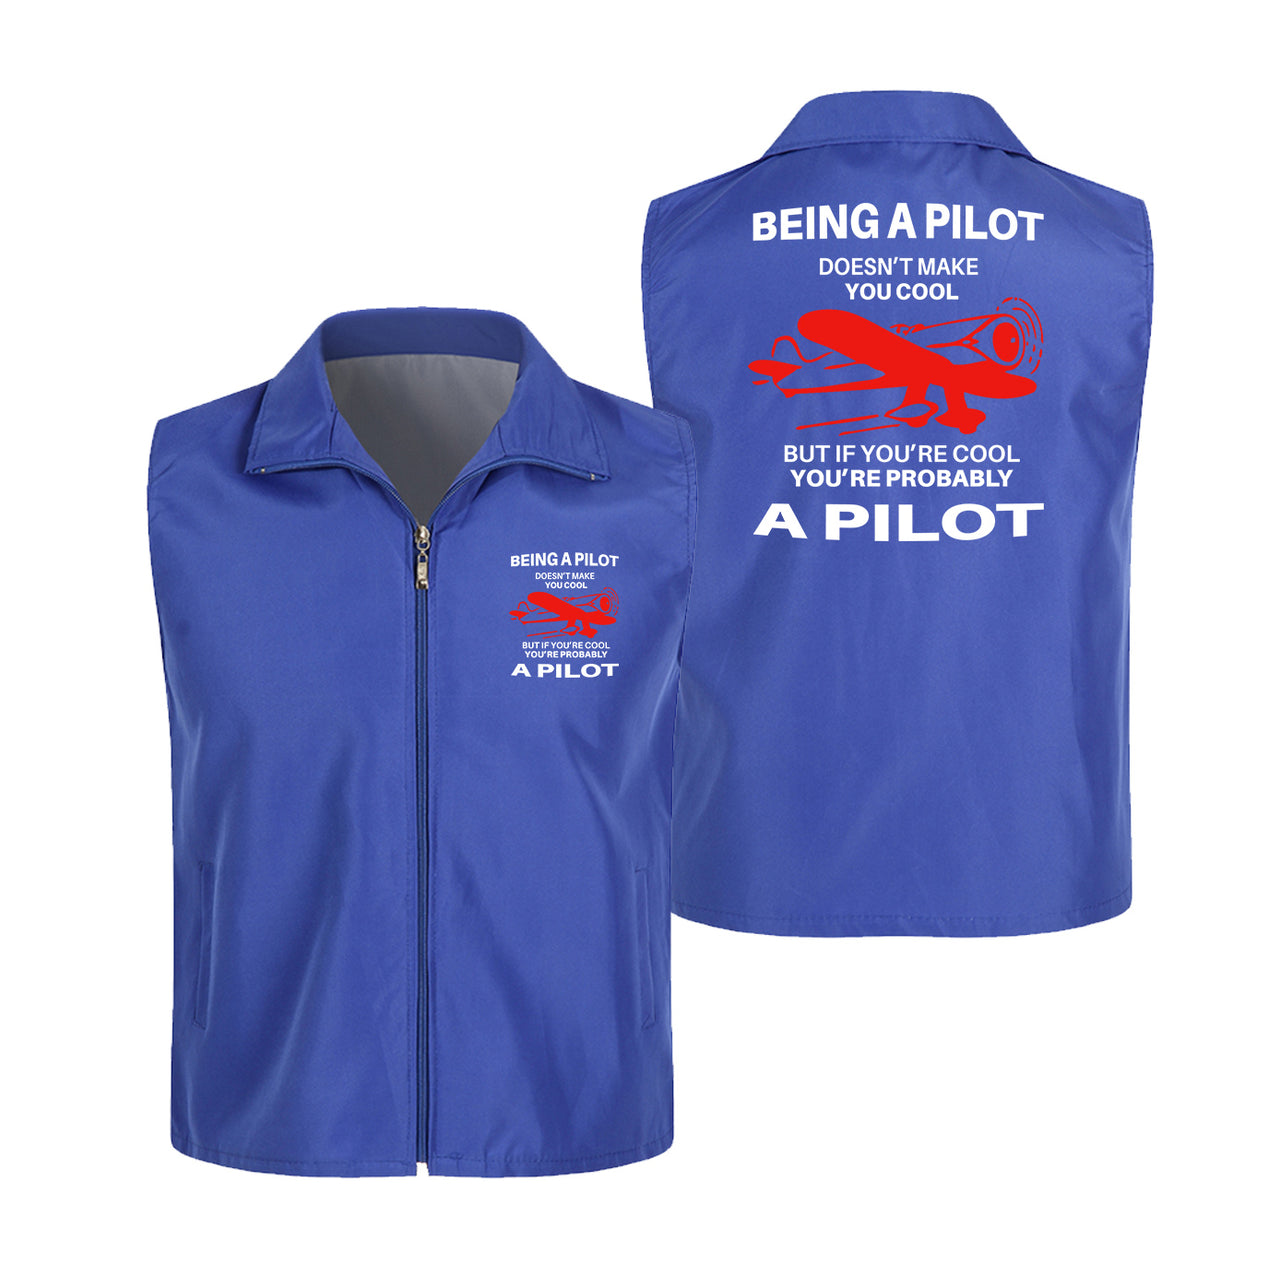 If You're Cool You're Probably a Pilot Designed Thin Style Vests